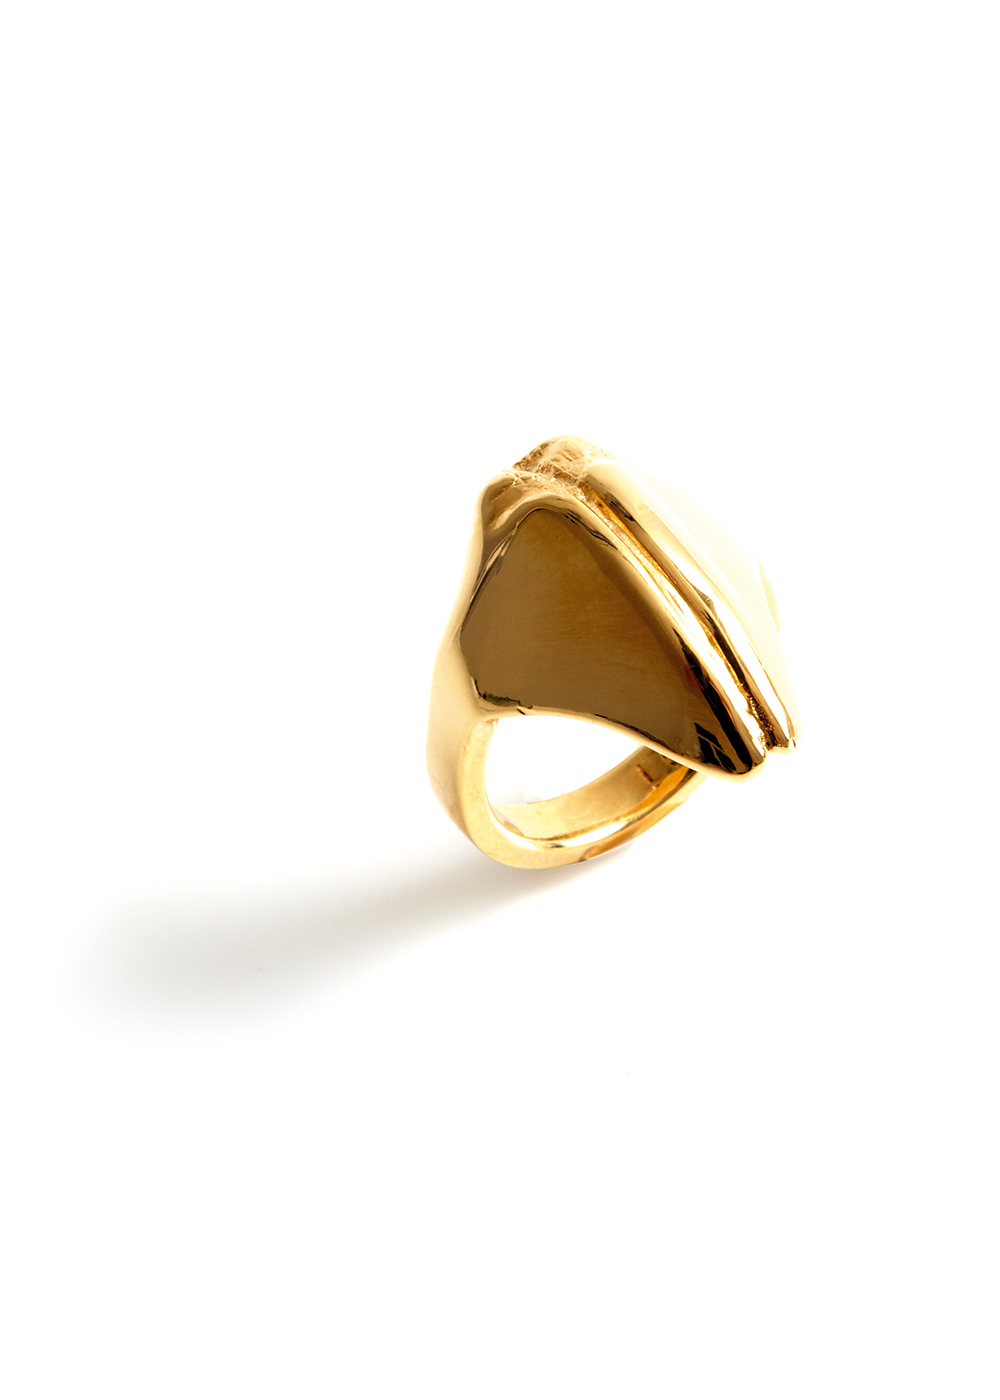 mandibile ring2, gold plated